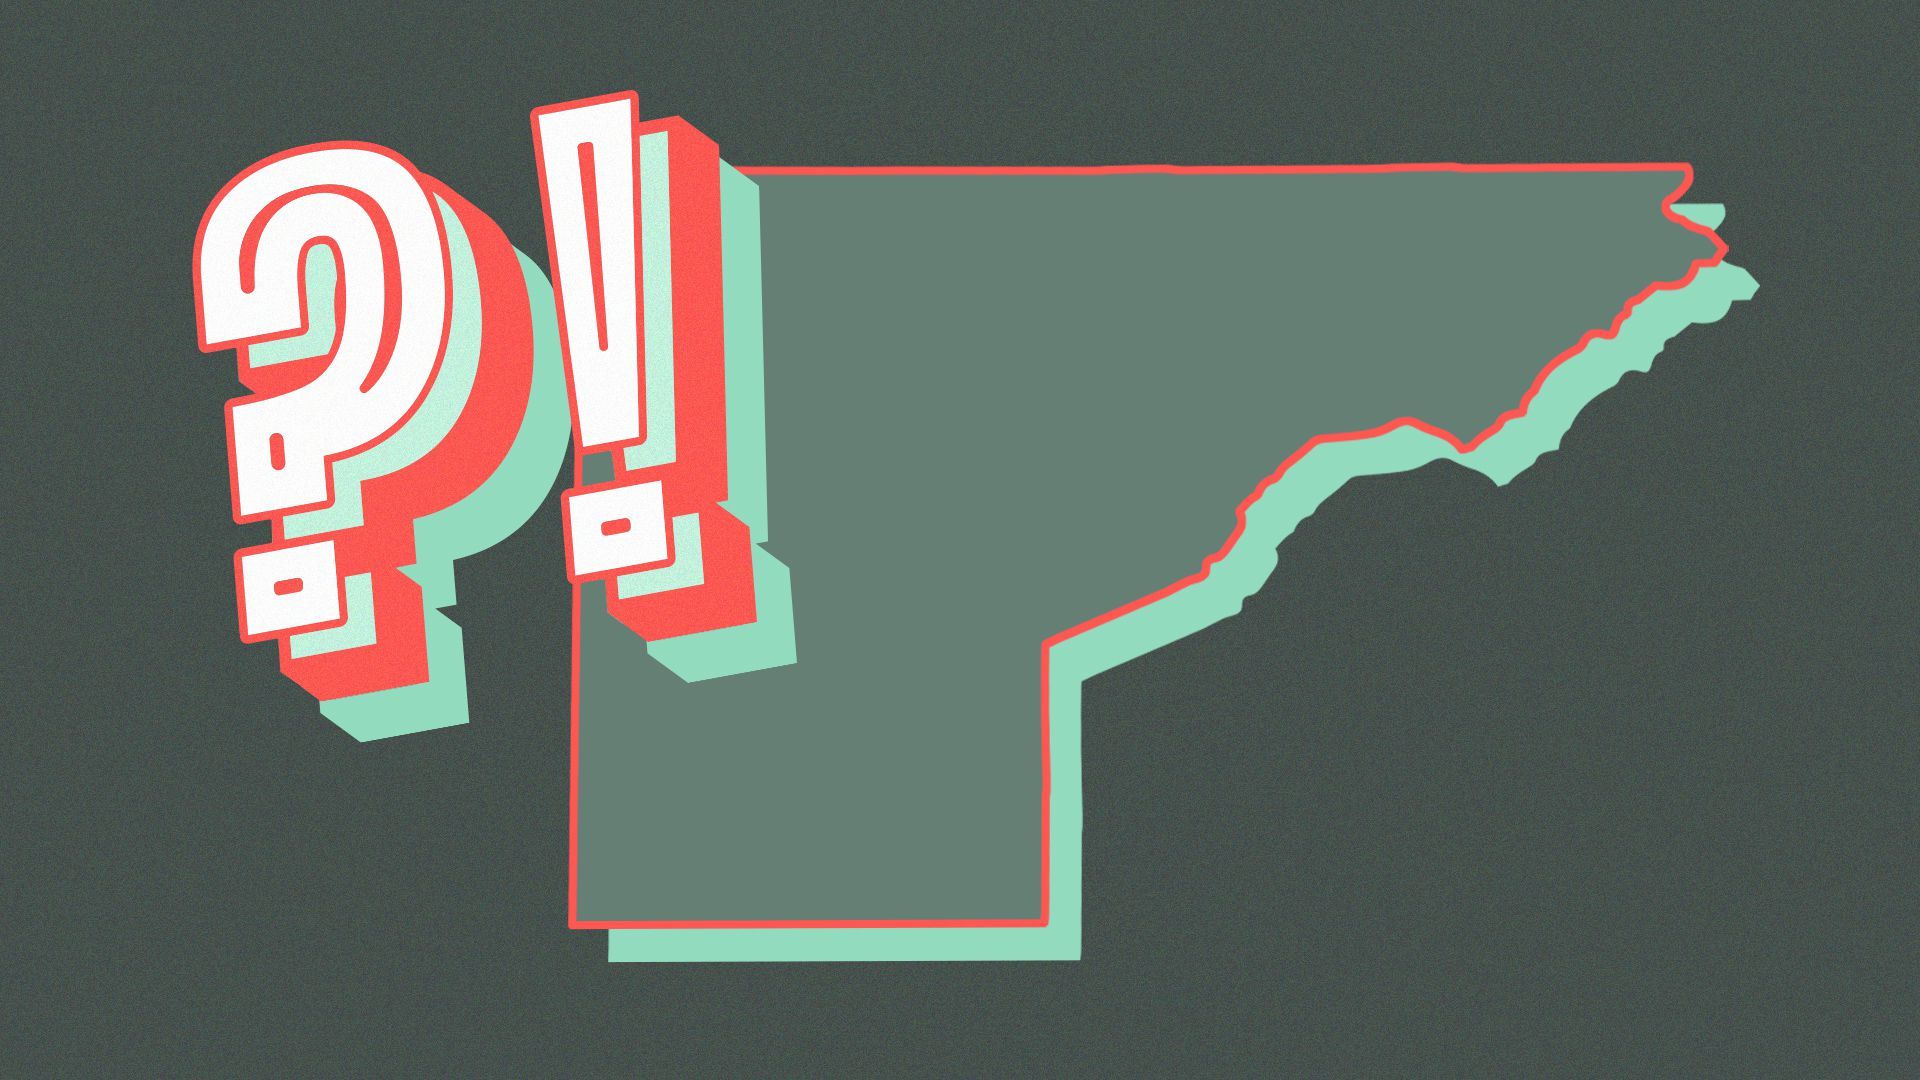 Illustration of the outline of Mesa County, CO and an interrobang.